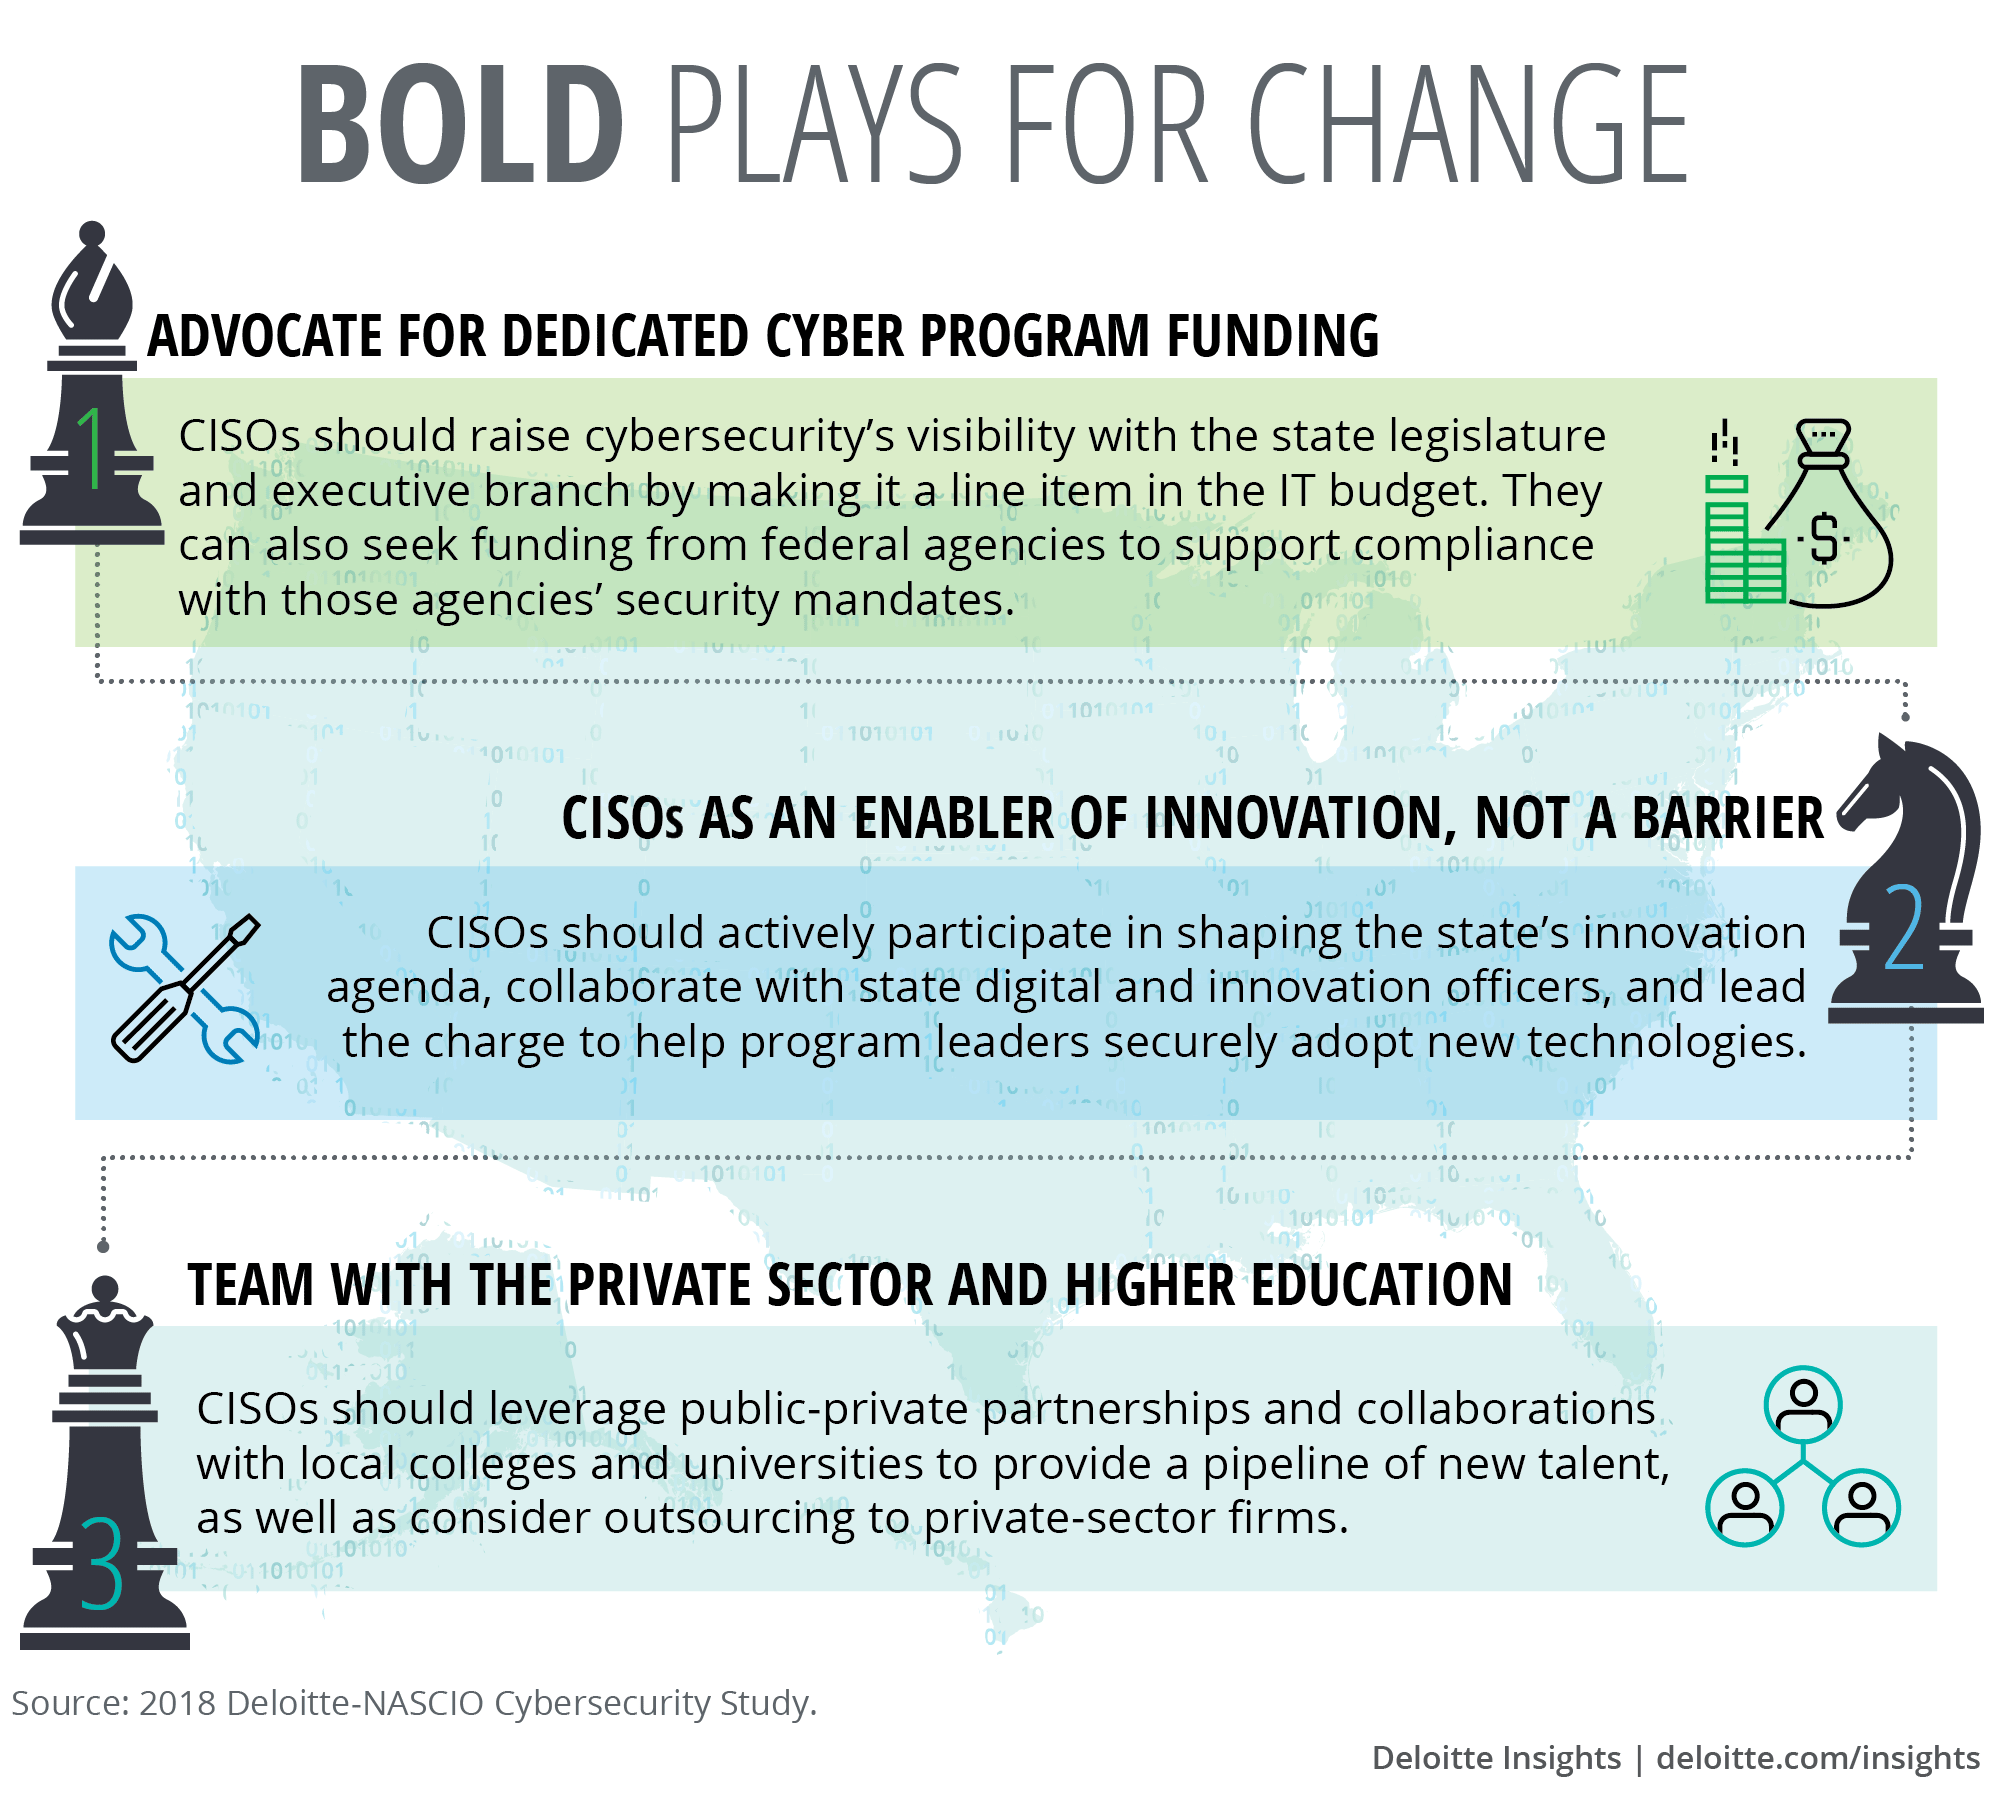 Three bold plays for CISOs to consider